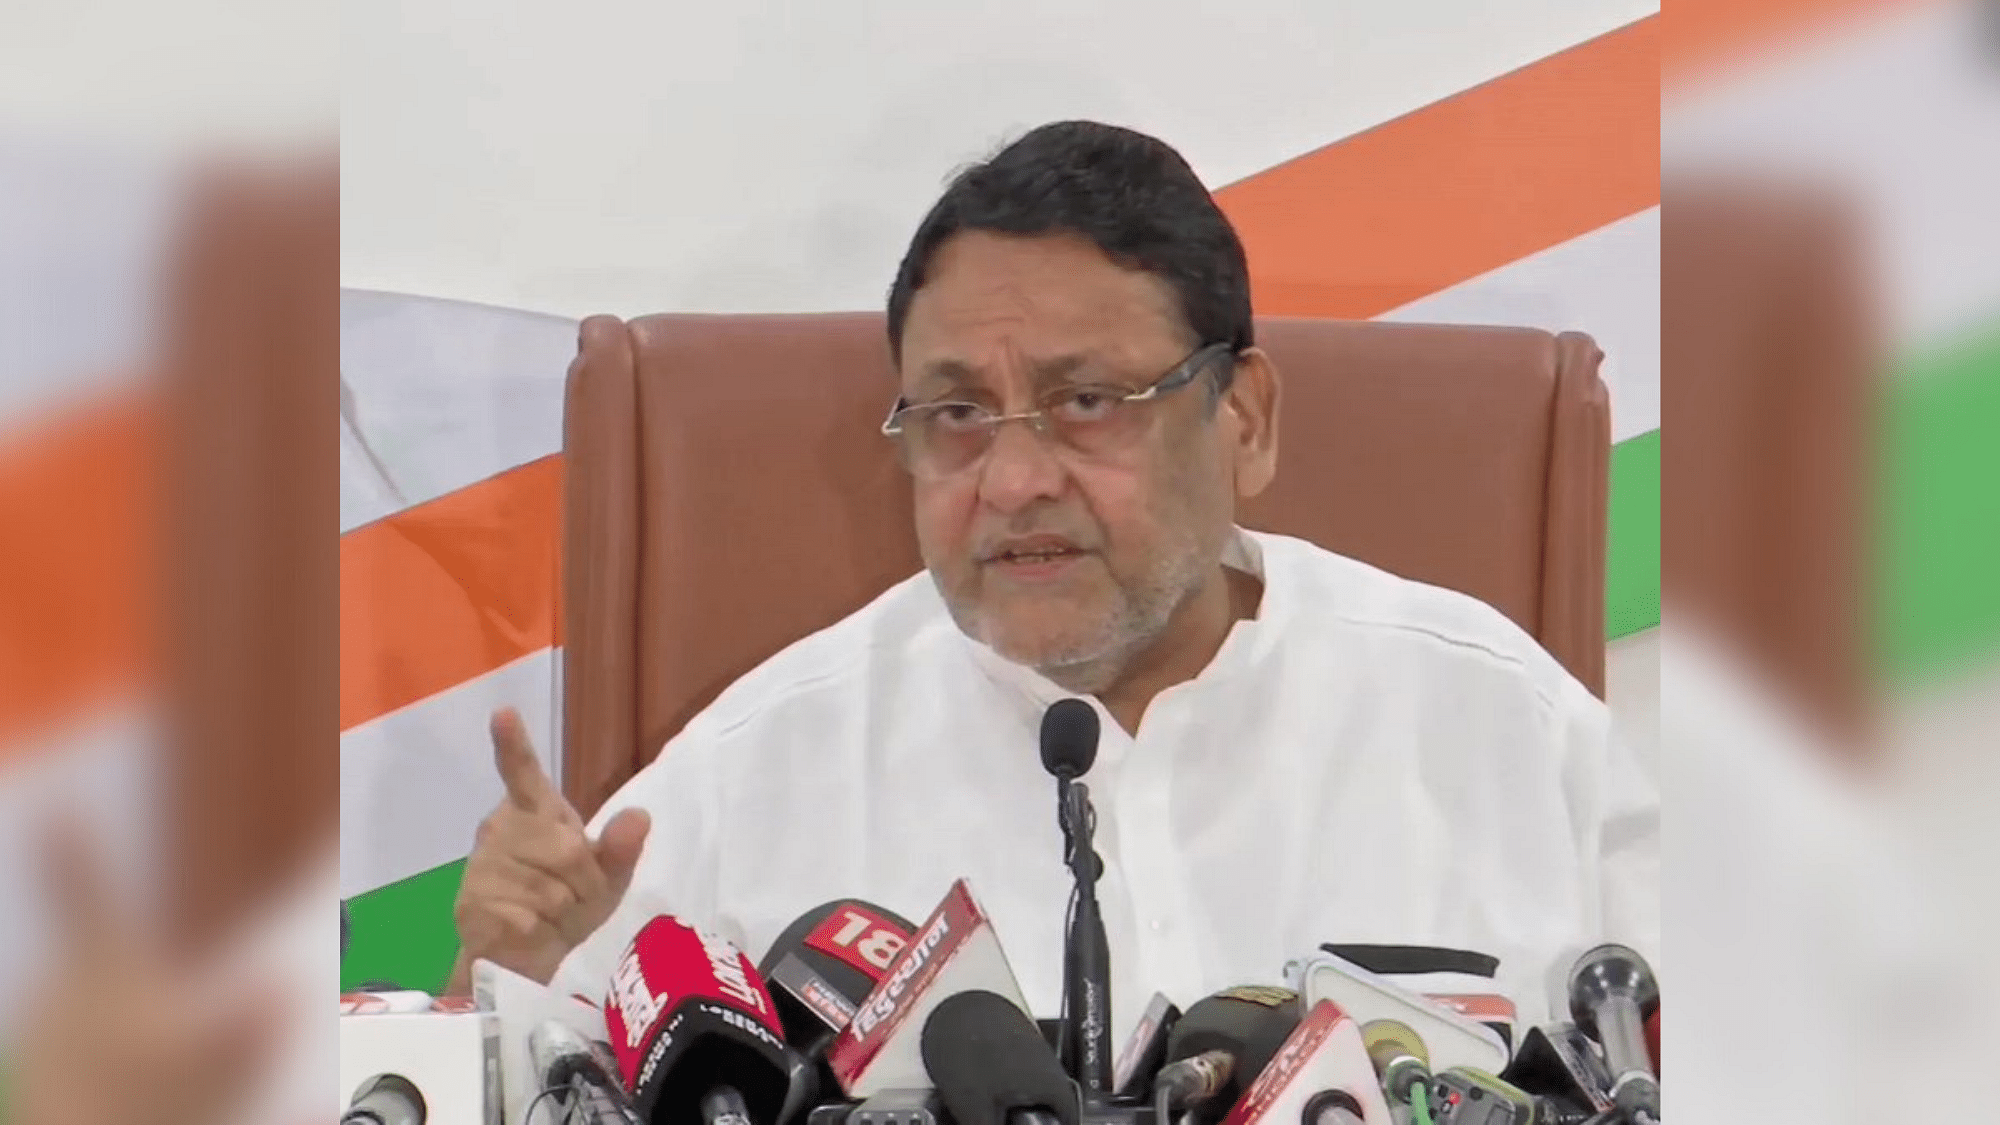 <div class="paragraphs"><p>Maharashtra Minorities Affairs Minister Nawab Malik on Saturday made a startling claim that a conspiracy is underway to frame him in an 'Anil Deshmukh-style fake case', allegedly at the "behest" of some officials in Central agencies, but did not identify them. Image used for representational purposes.&nbsp;</p></div>